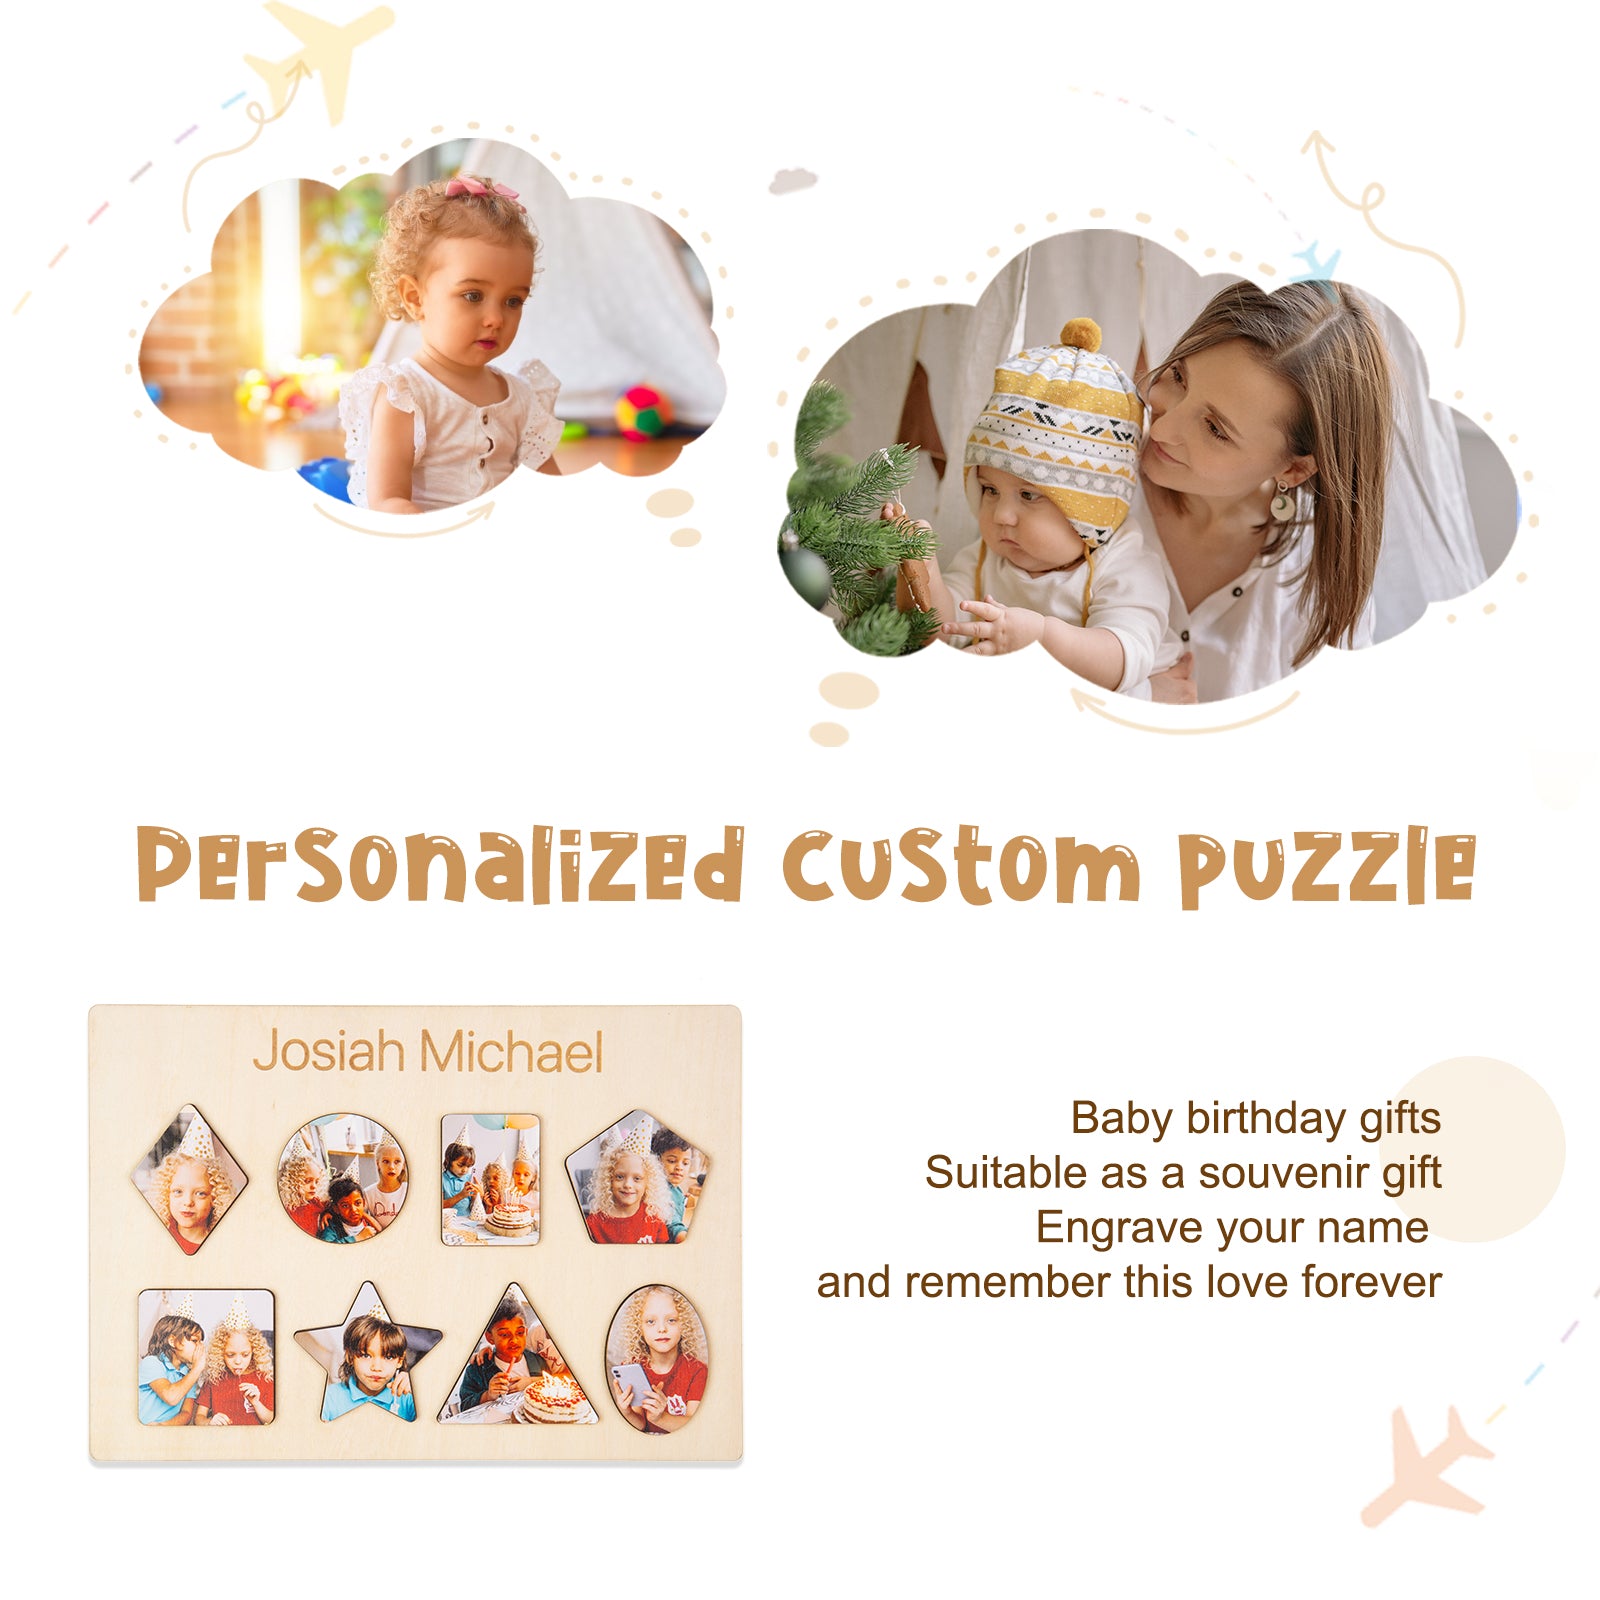 Custom Wooden Photo Name Puzzle With 8 Shapes